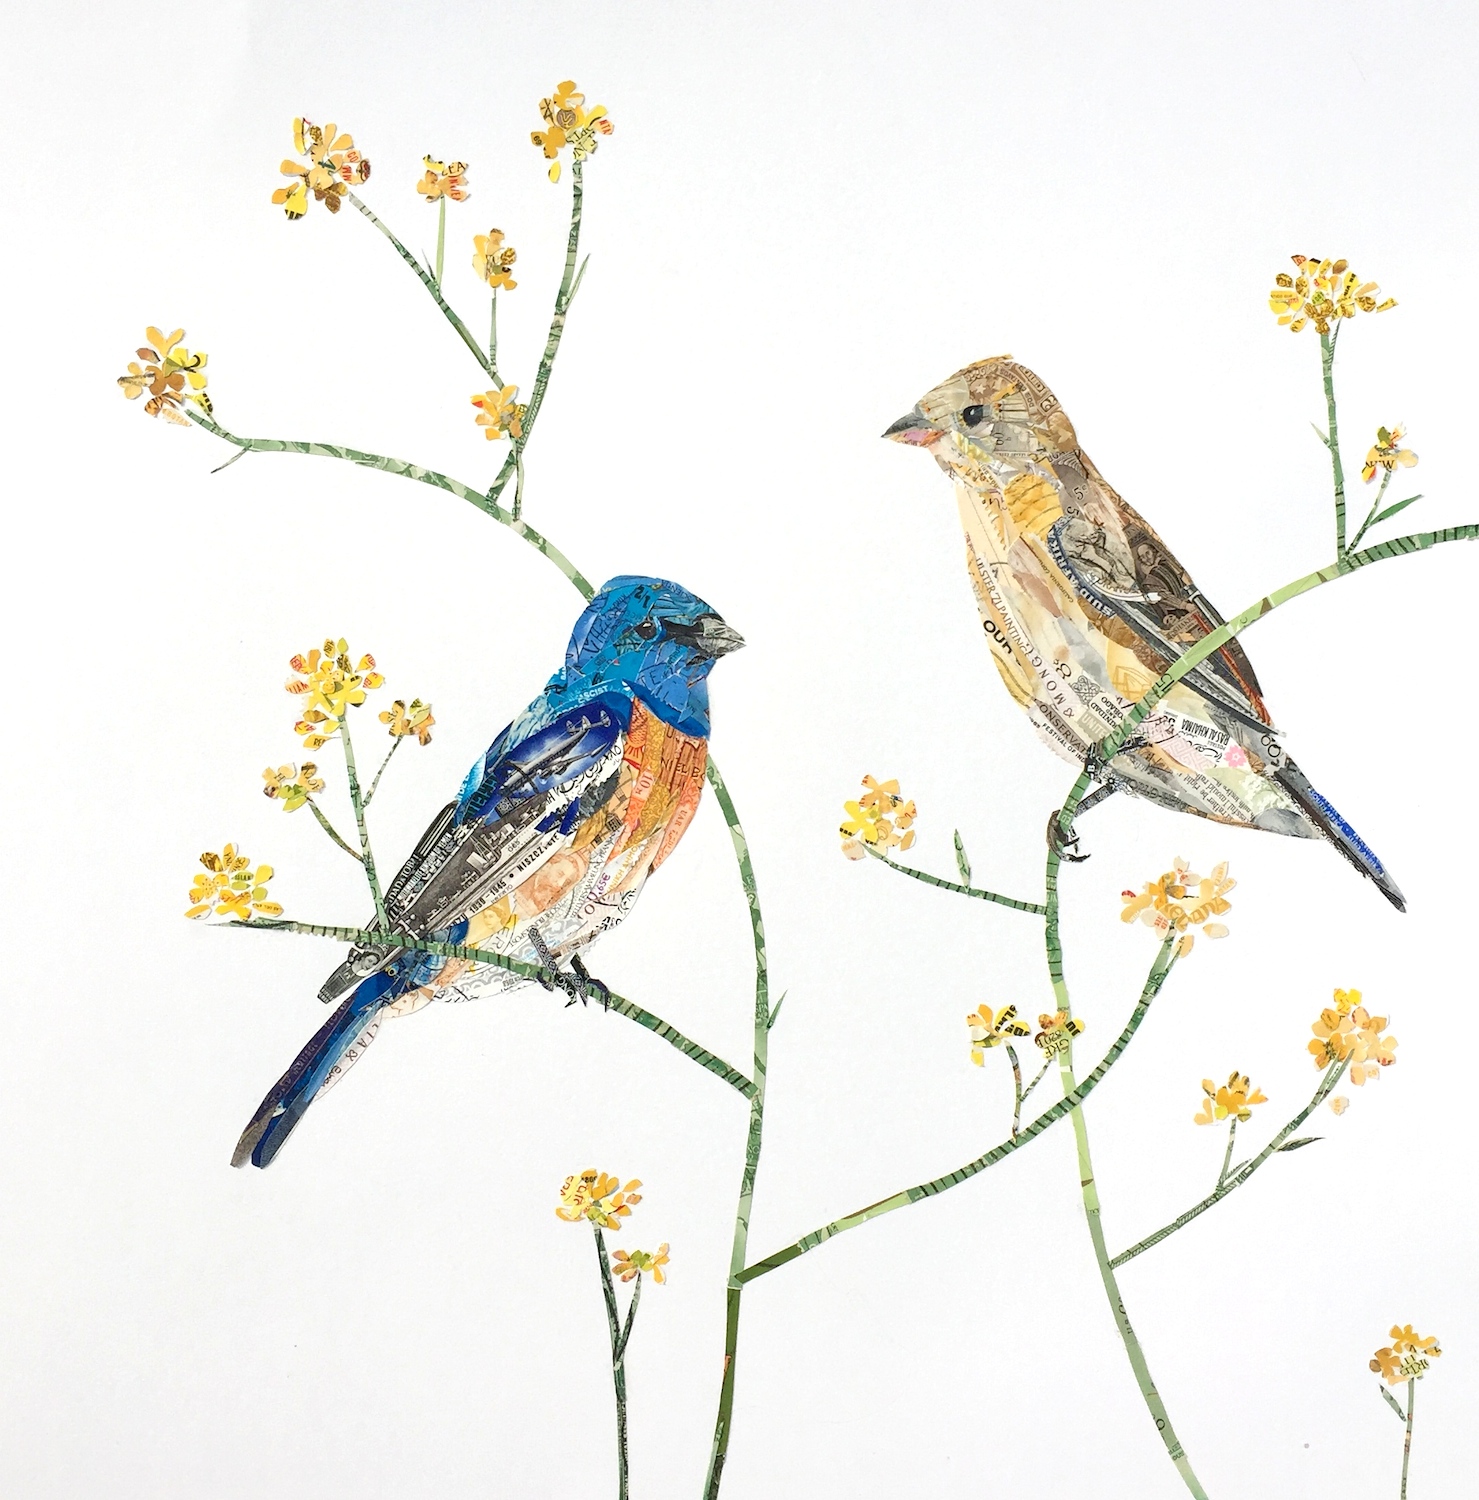 Kerry Buchman, Indigo Buntings, 2015. Postage stamps on paper, 15 x 17 in.